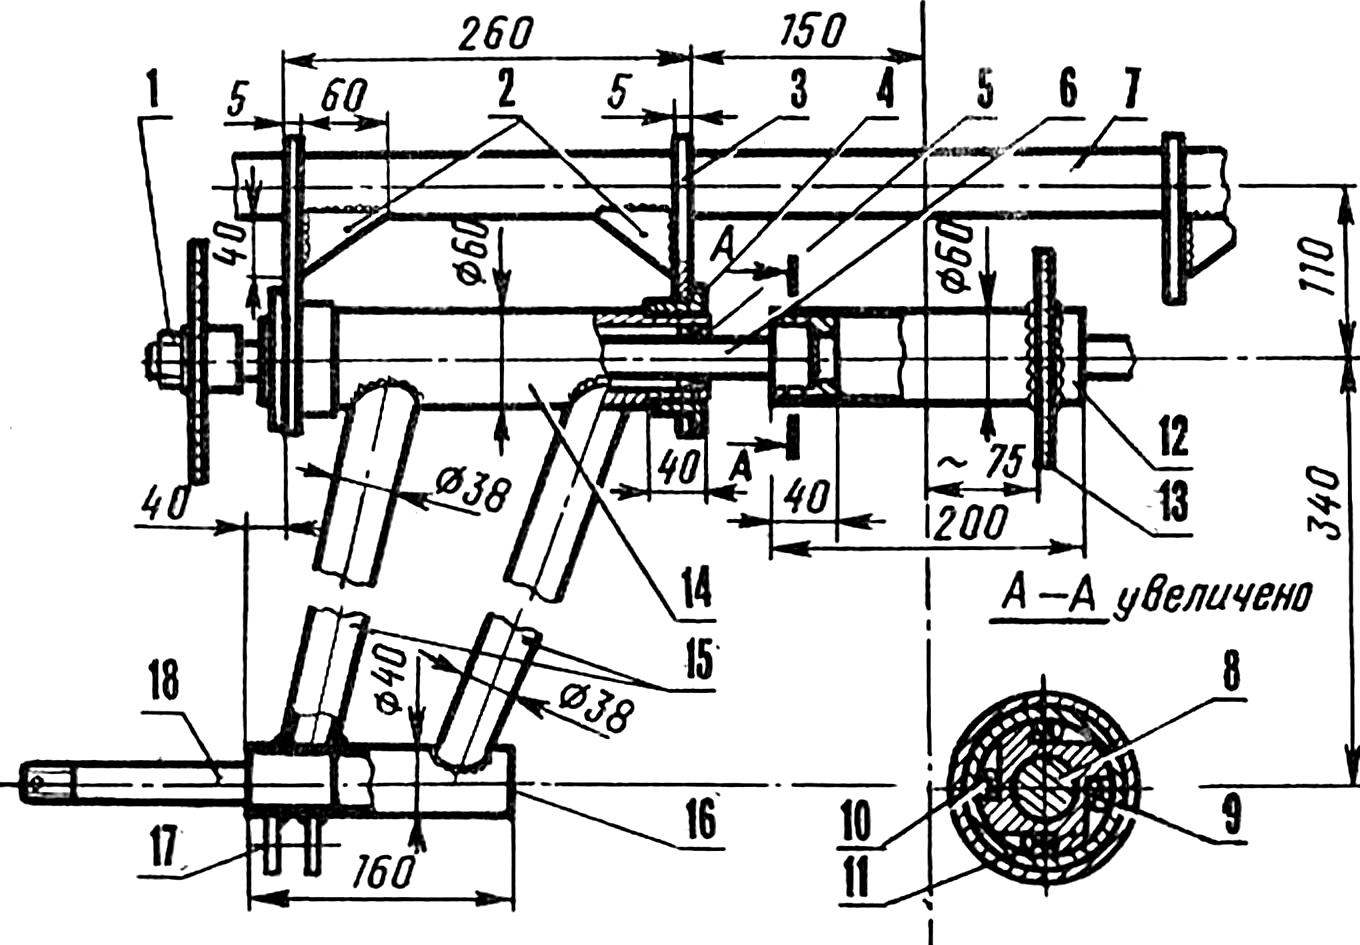 Fig. 4. The rear suspension of the car.